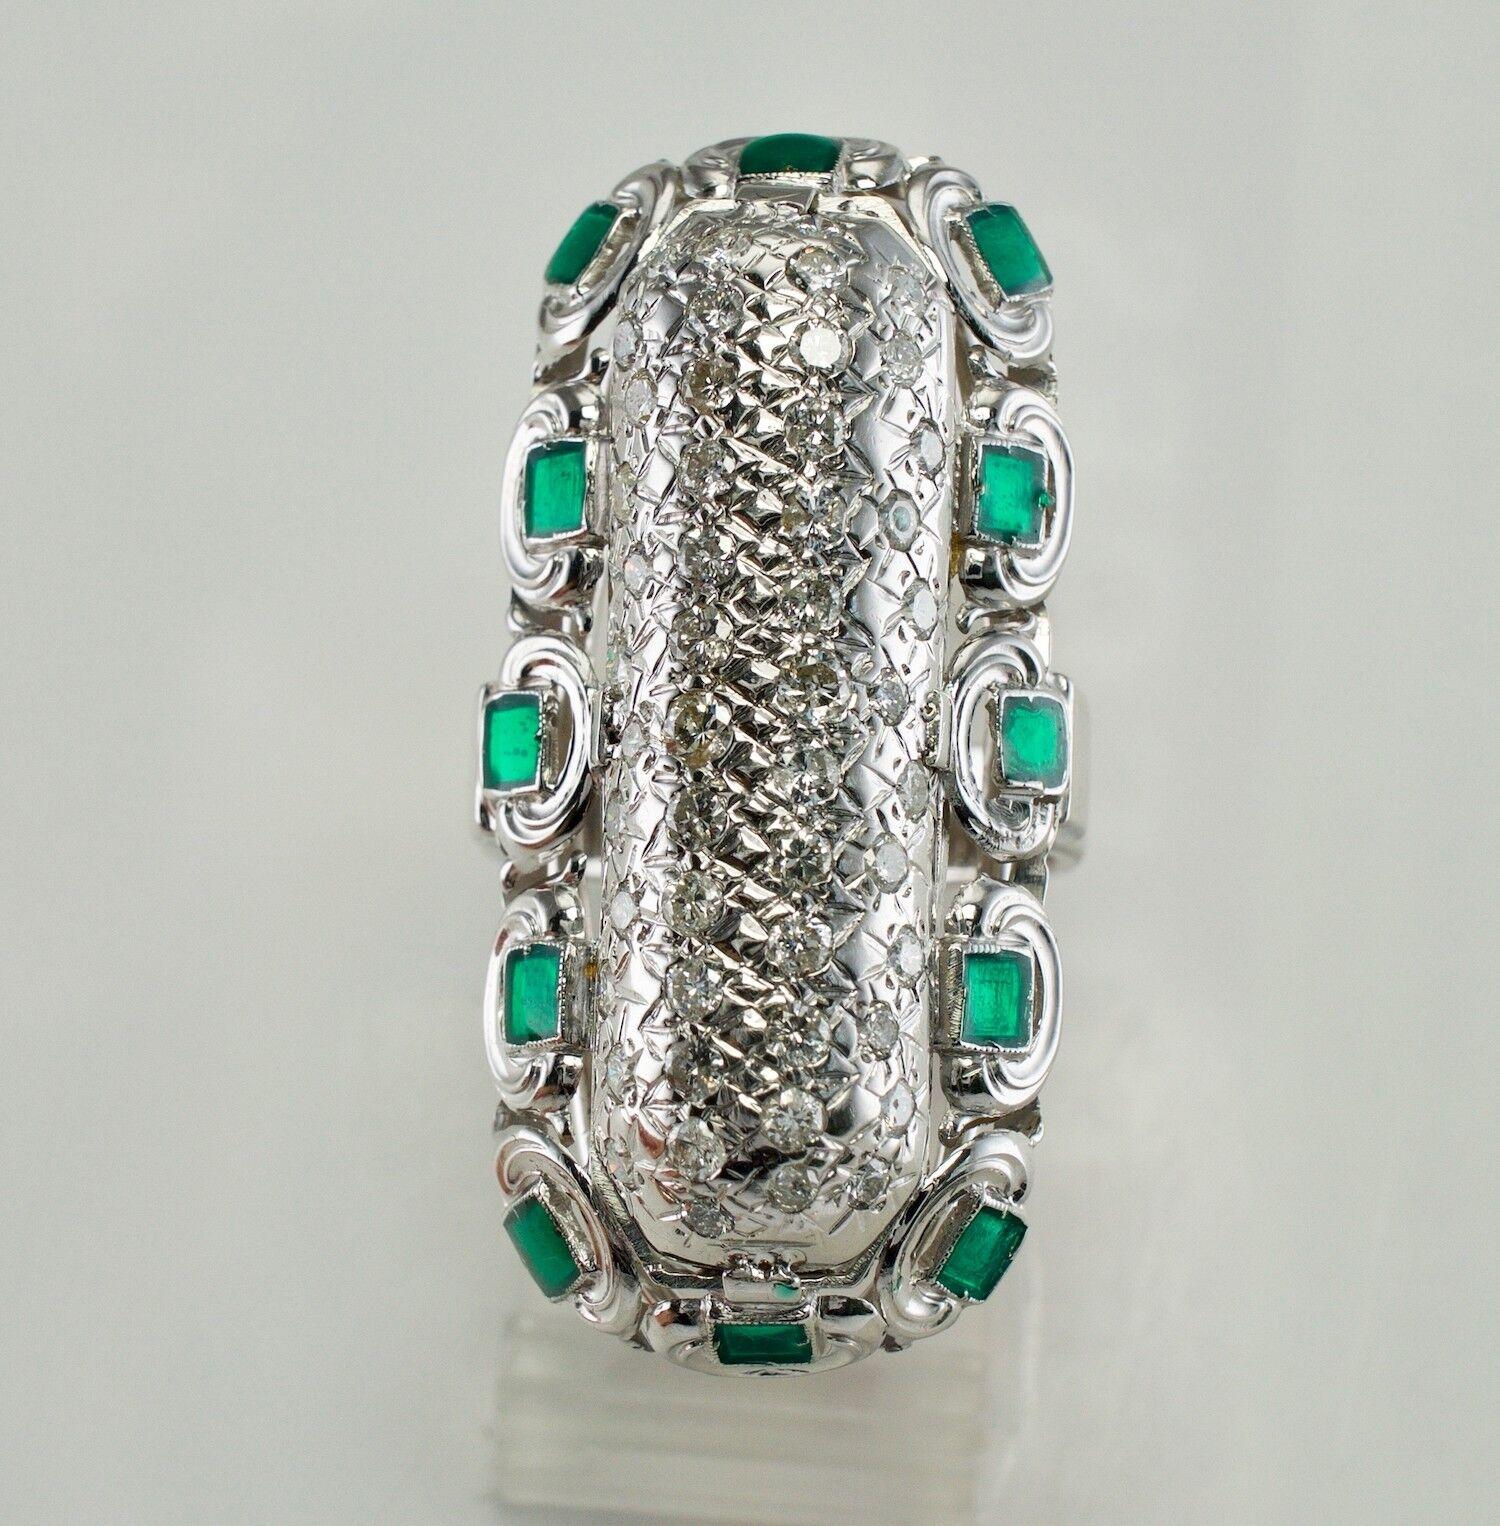 This one of a kind vintage ring is finely crafted in solid 14K White Gold and set with genuine diamonds and green enamel. The emerald green enamel is in perfect condition. The enamel pieces look like real emeralds, absolutely stunning color!

There